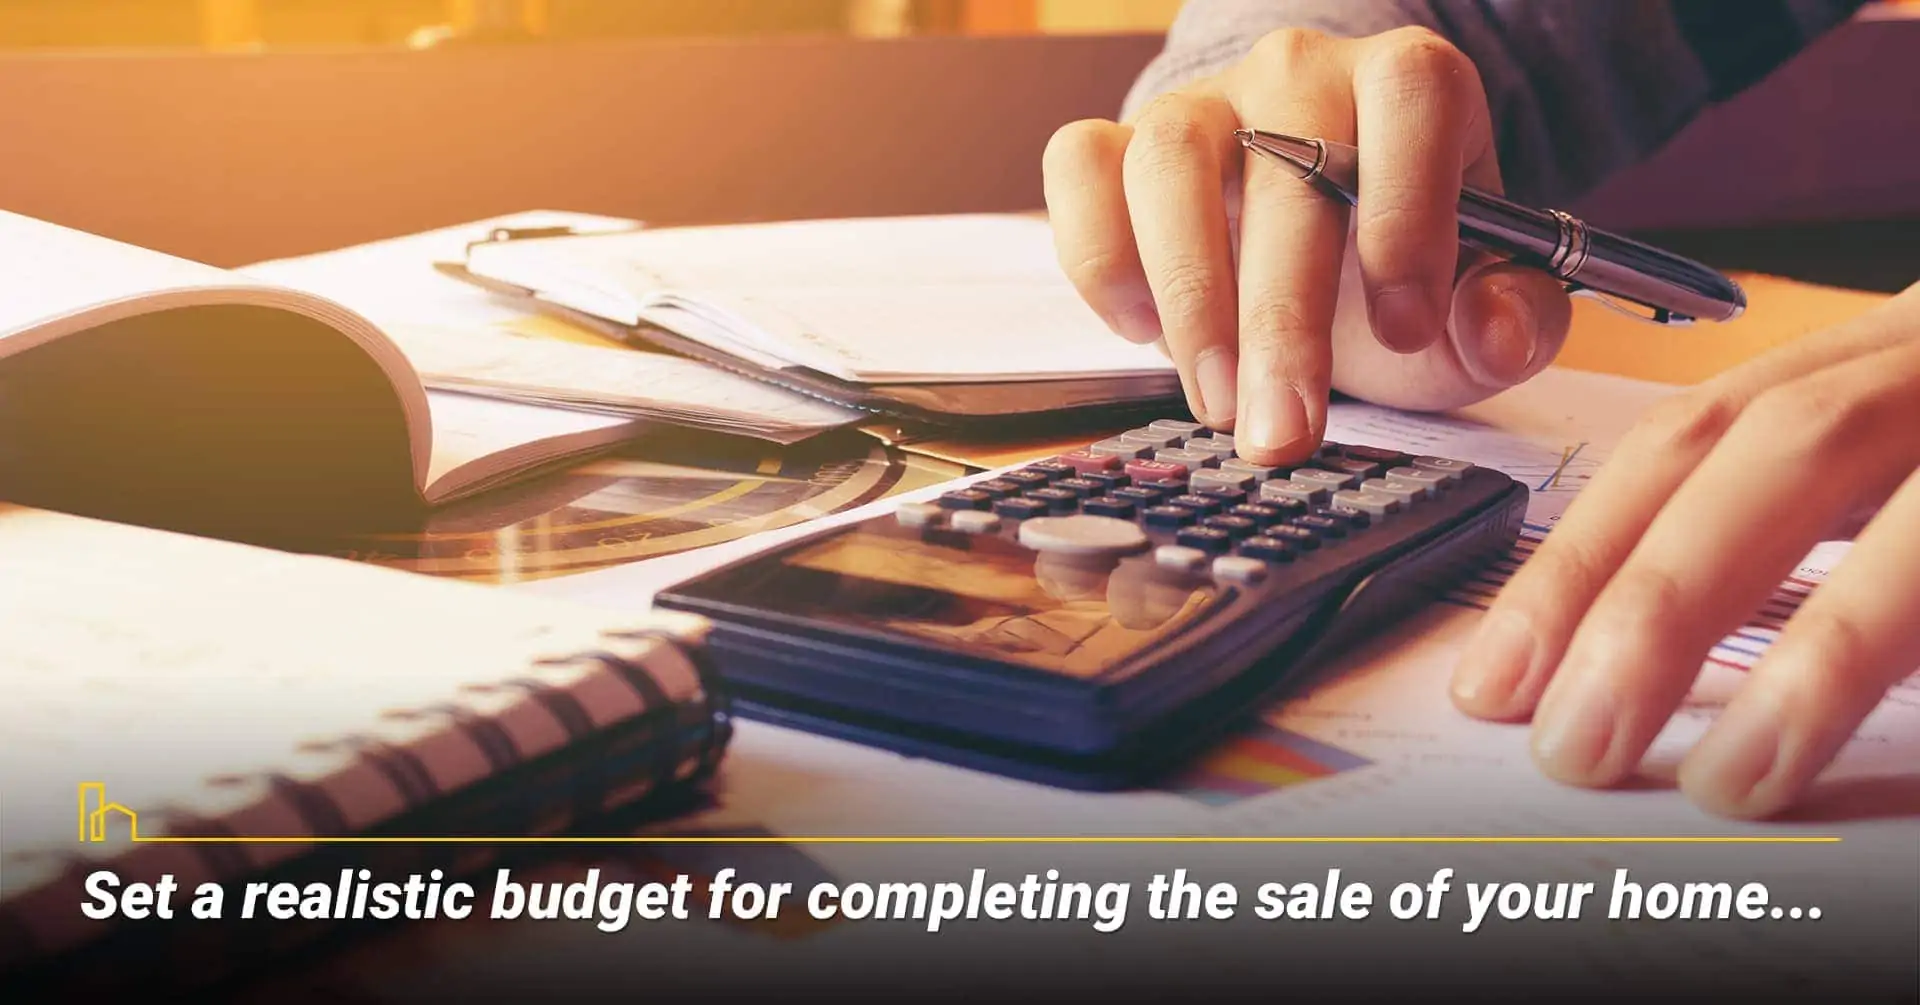 Set a realistic budget for completing the sale of your home... keep it within your budget